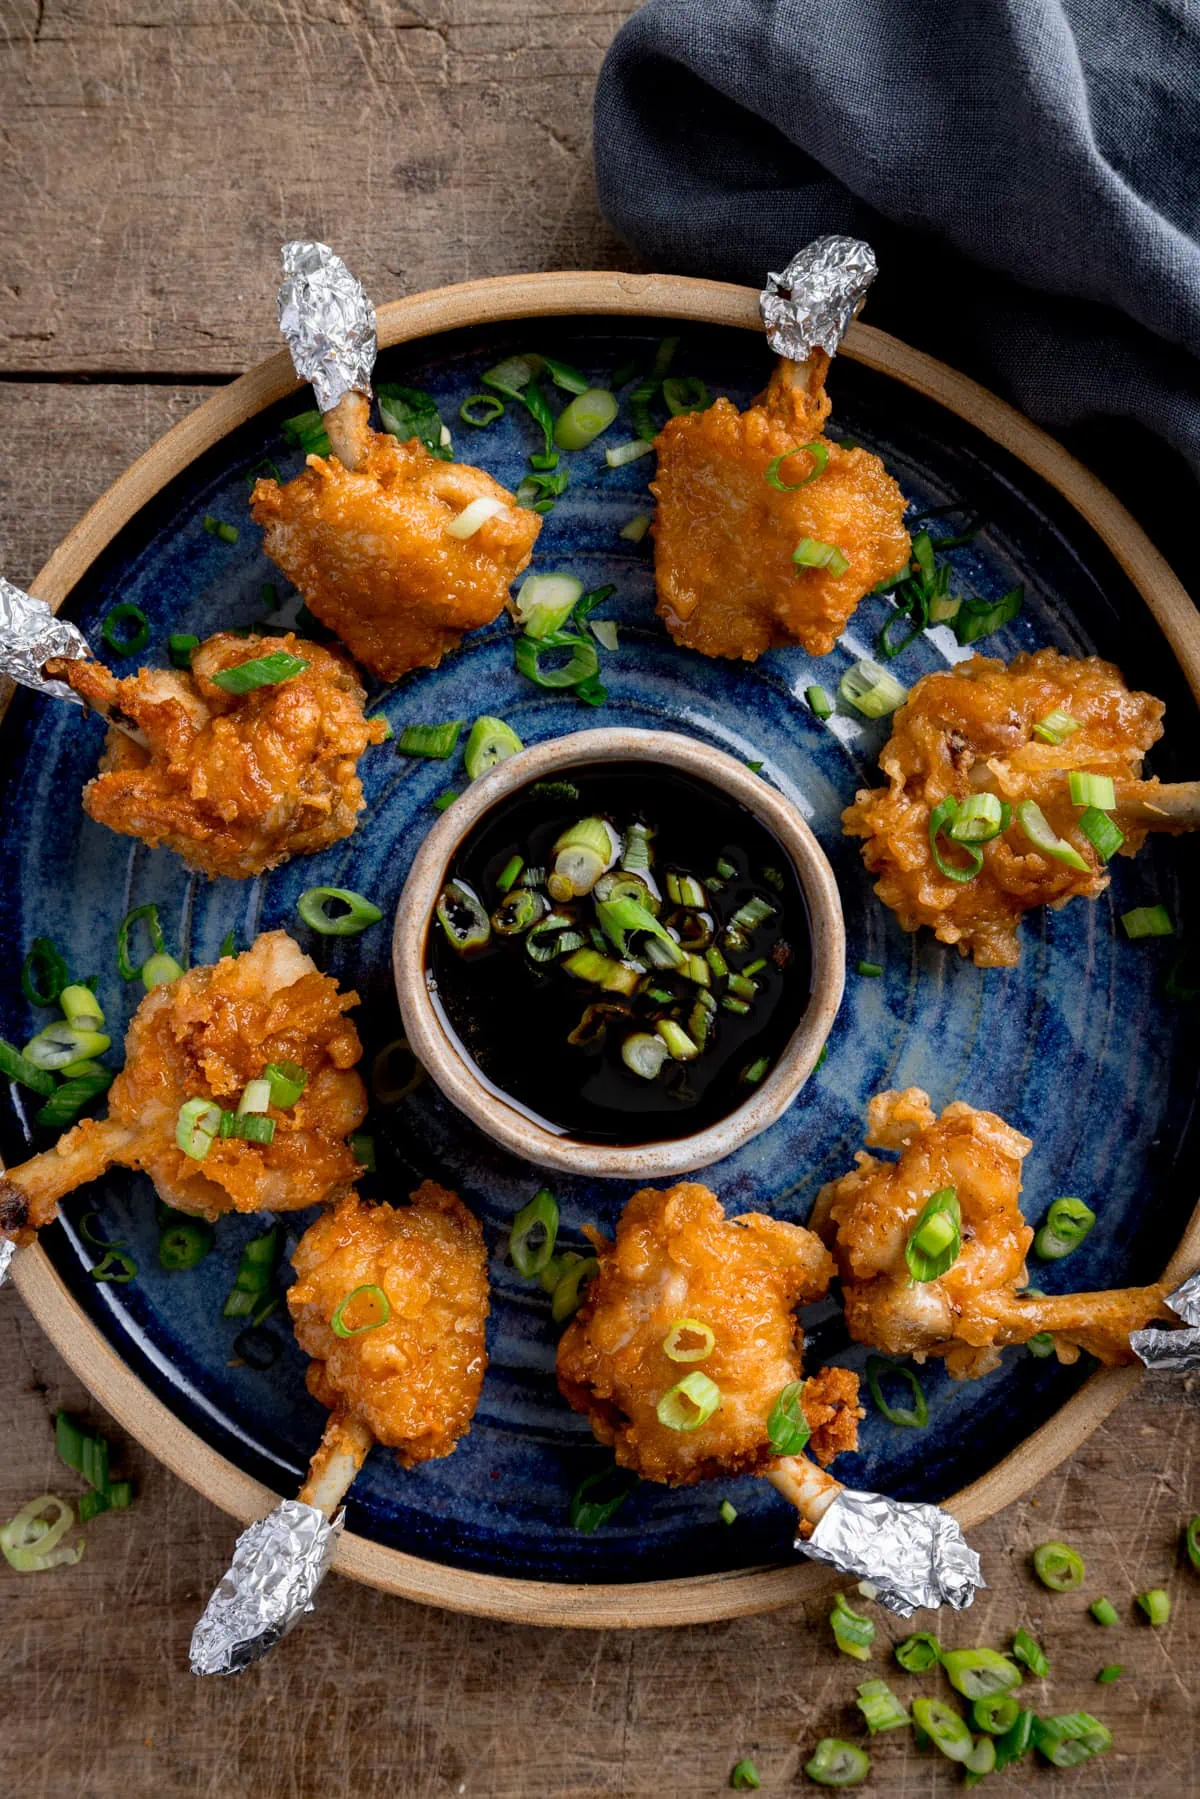 Chicken lollipops arranged in a circle on a blue plate with a dipping bowl of sticky spicy sauce int he middle. The lollipops and sauce have been sprinkled with chopped spring onions and the plate is in a wooden table next to a blue napkin.